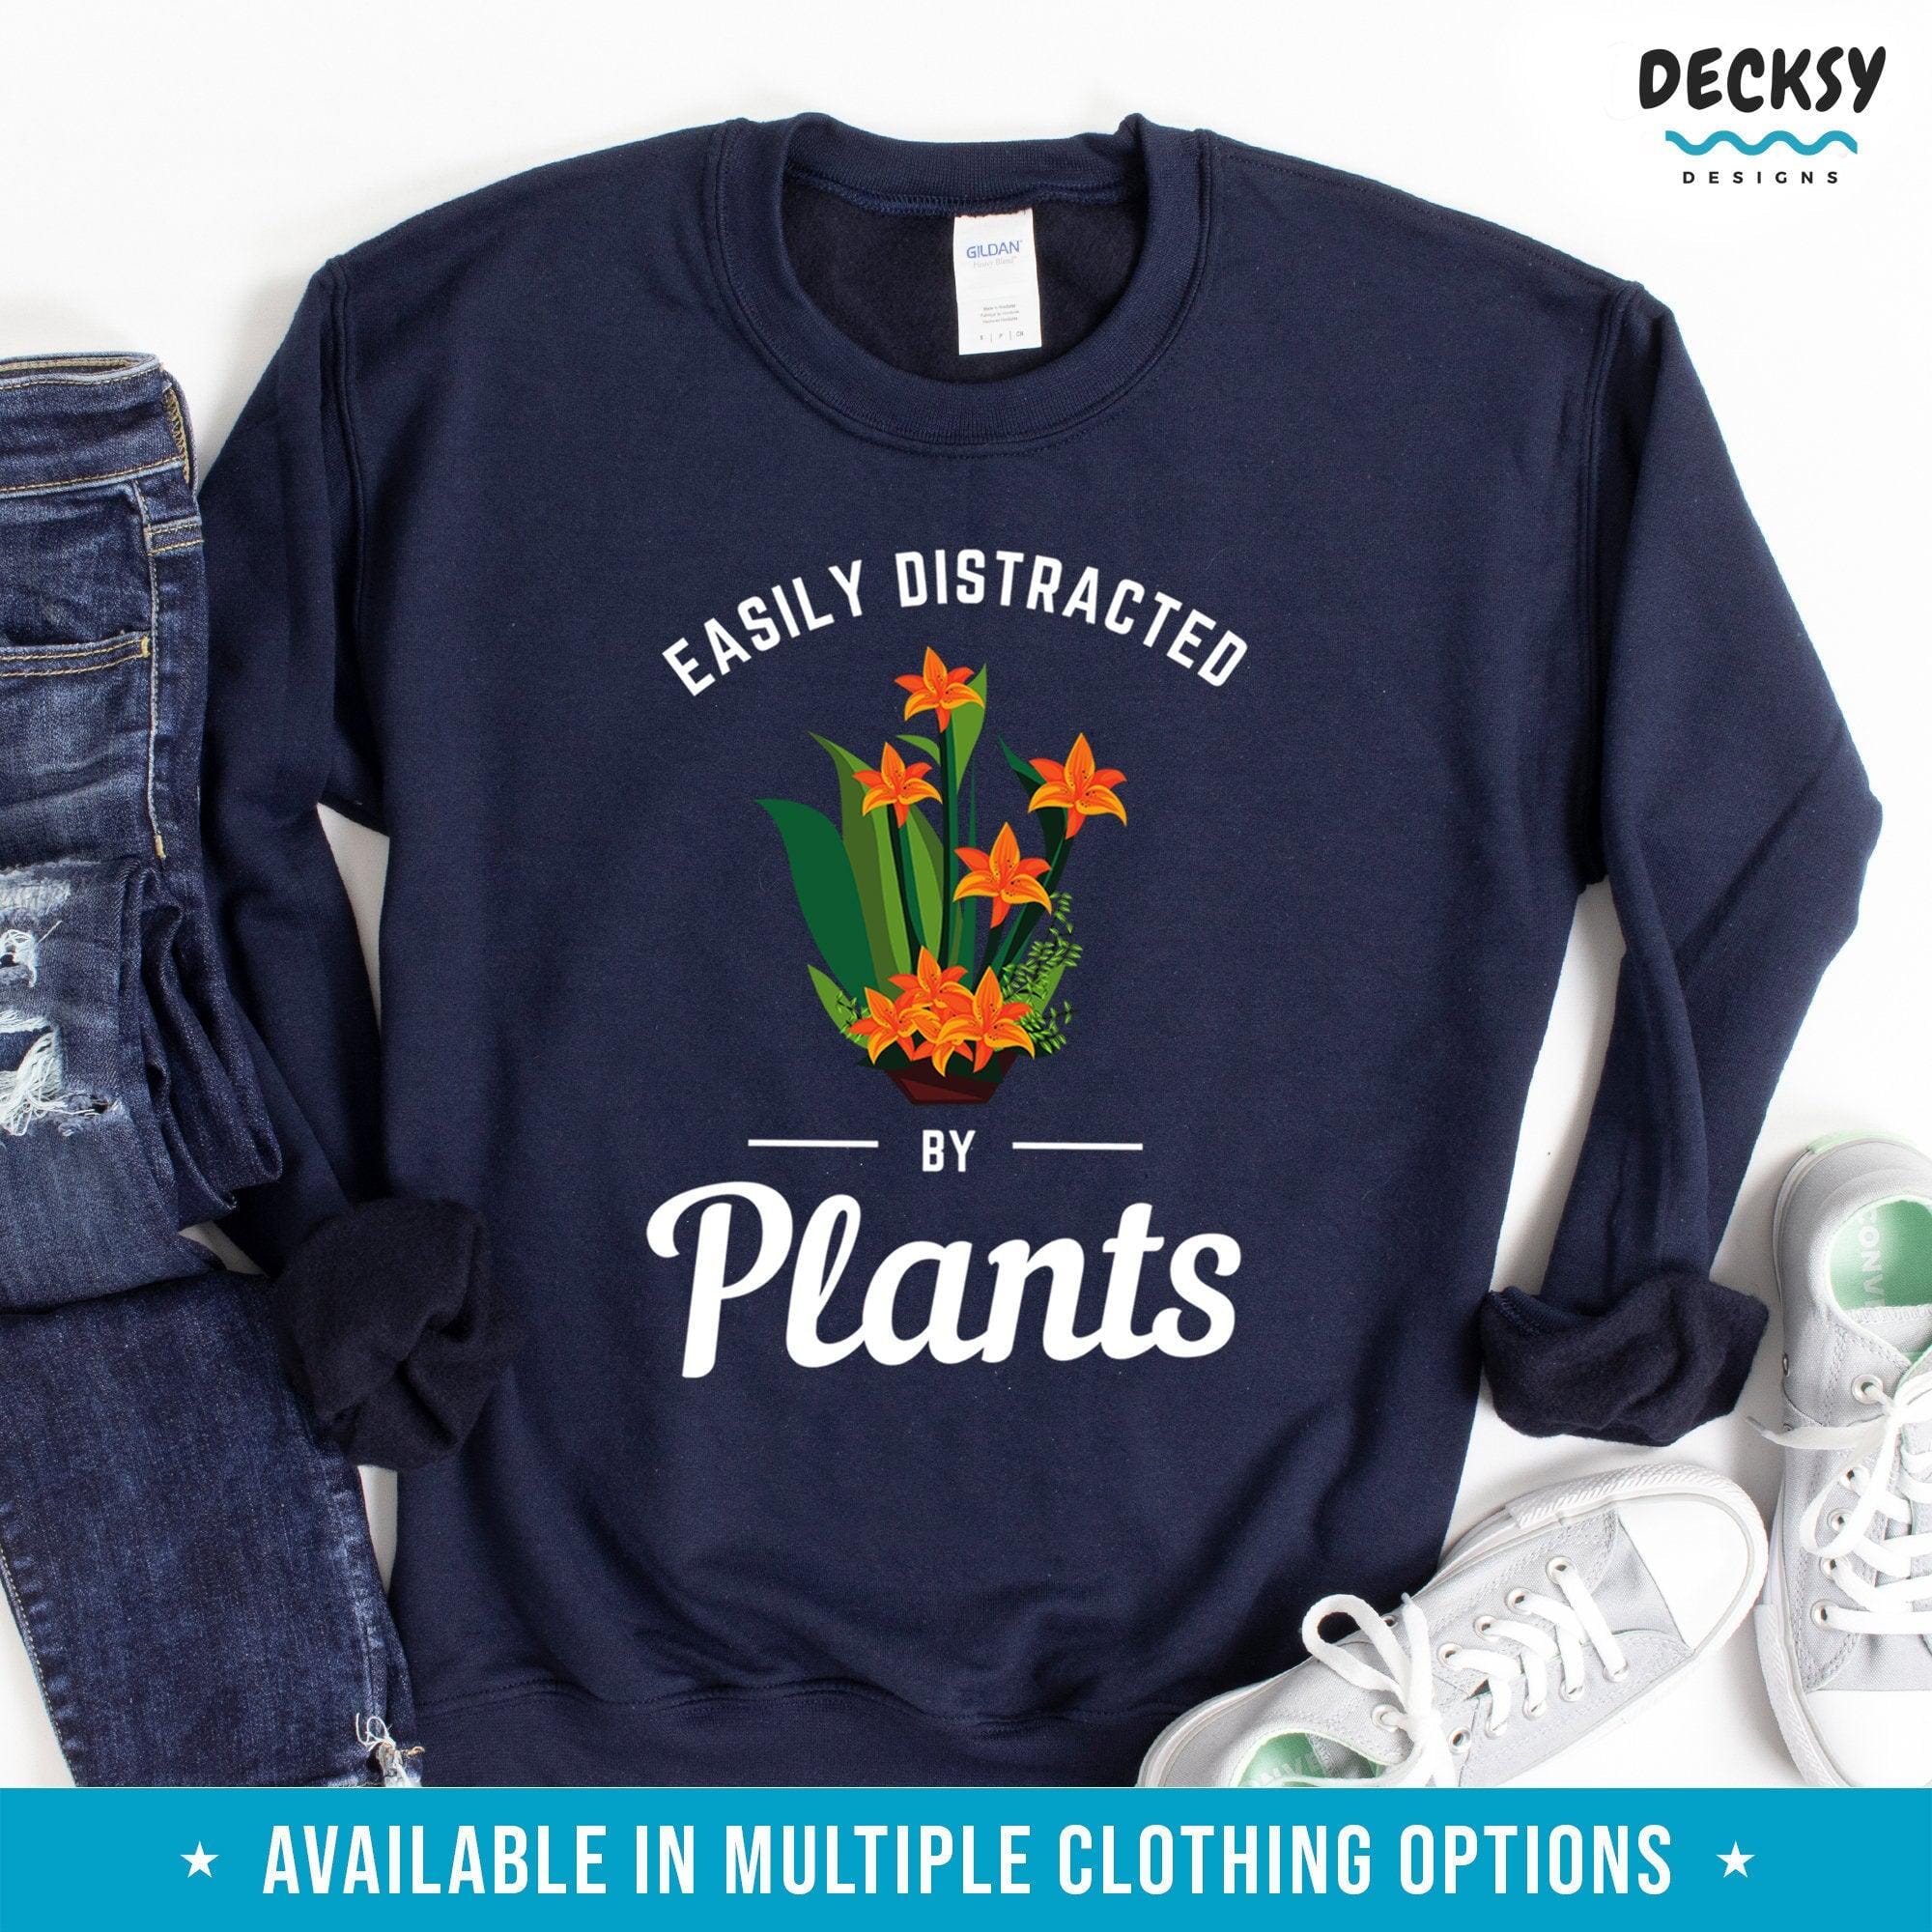 Easily Distracted By Plants Tshirt, Plant Lover Gift-Clothing:Gender-Neutral Adult Clothing:Tops & Tees:T-shirts:Graphic Tees-DecksyDesigns